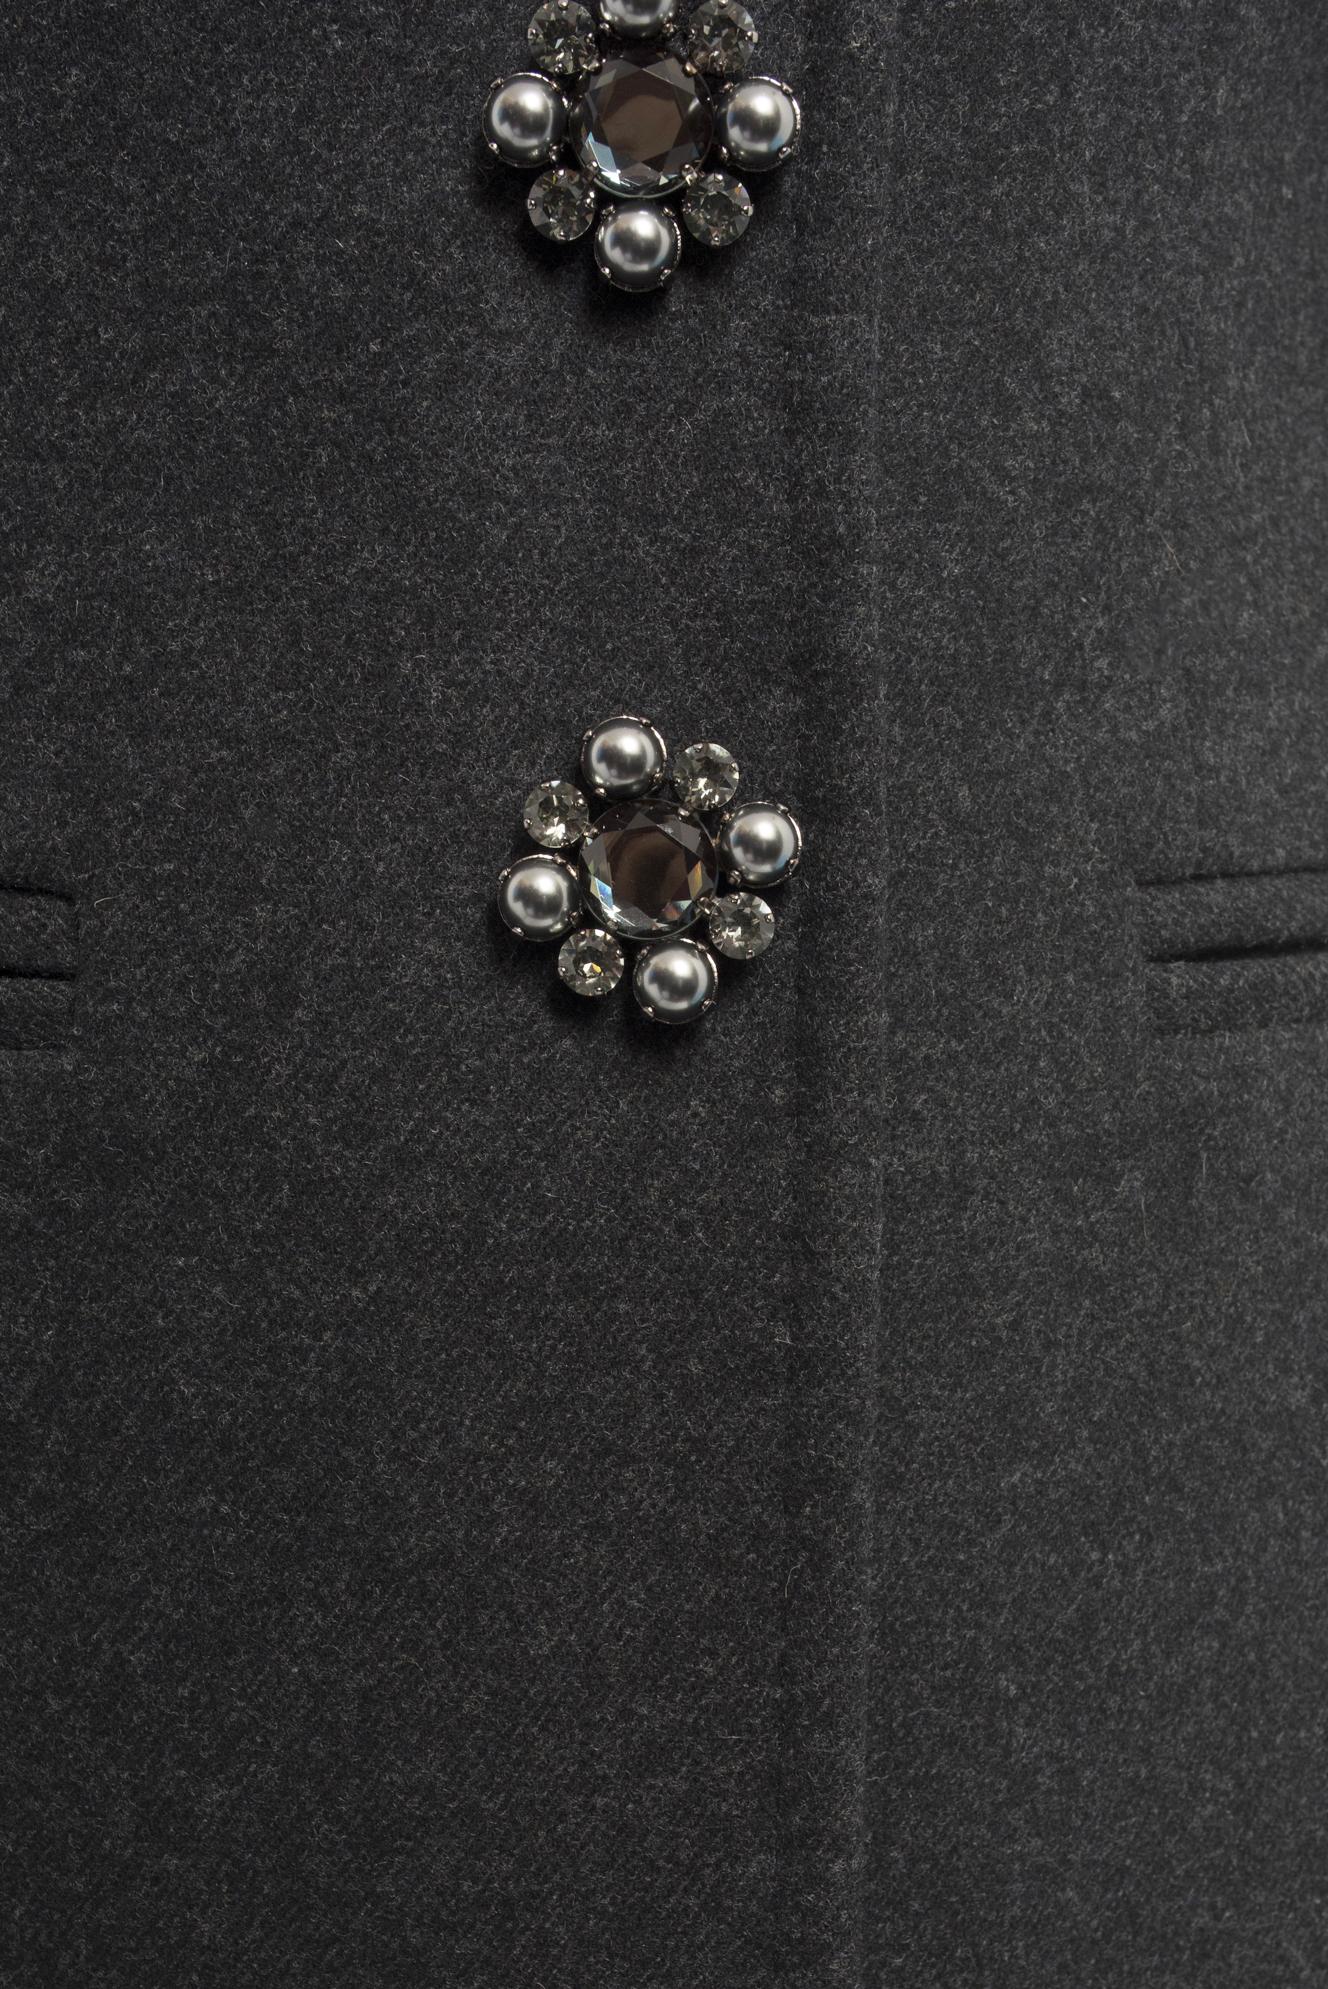 Dolce & Gabbana Charcoal Grey Mink Collar Wool Coat with Jewel Buttons - S 2